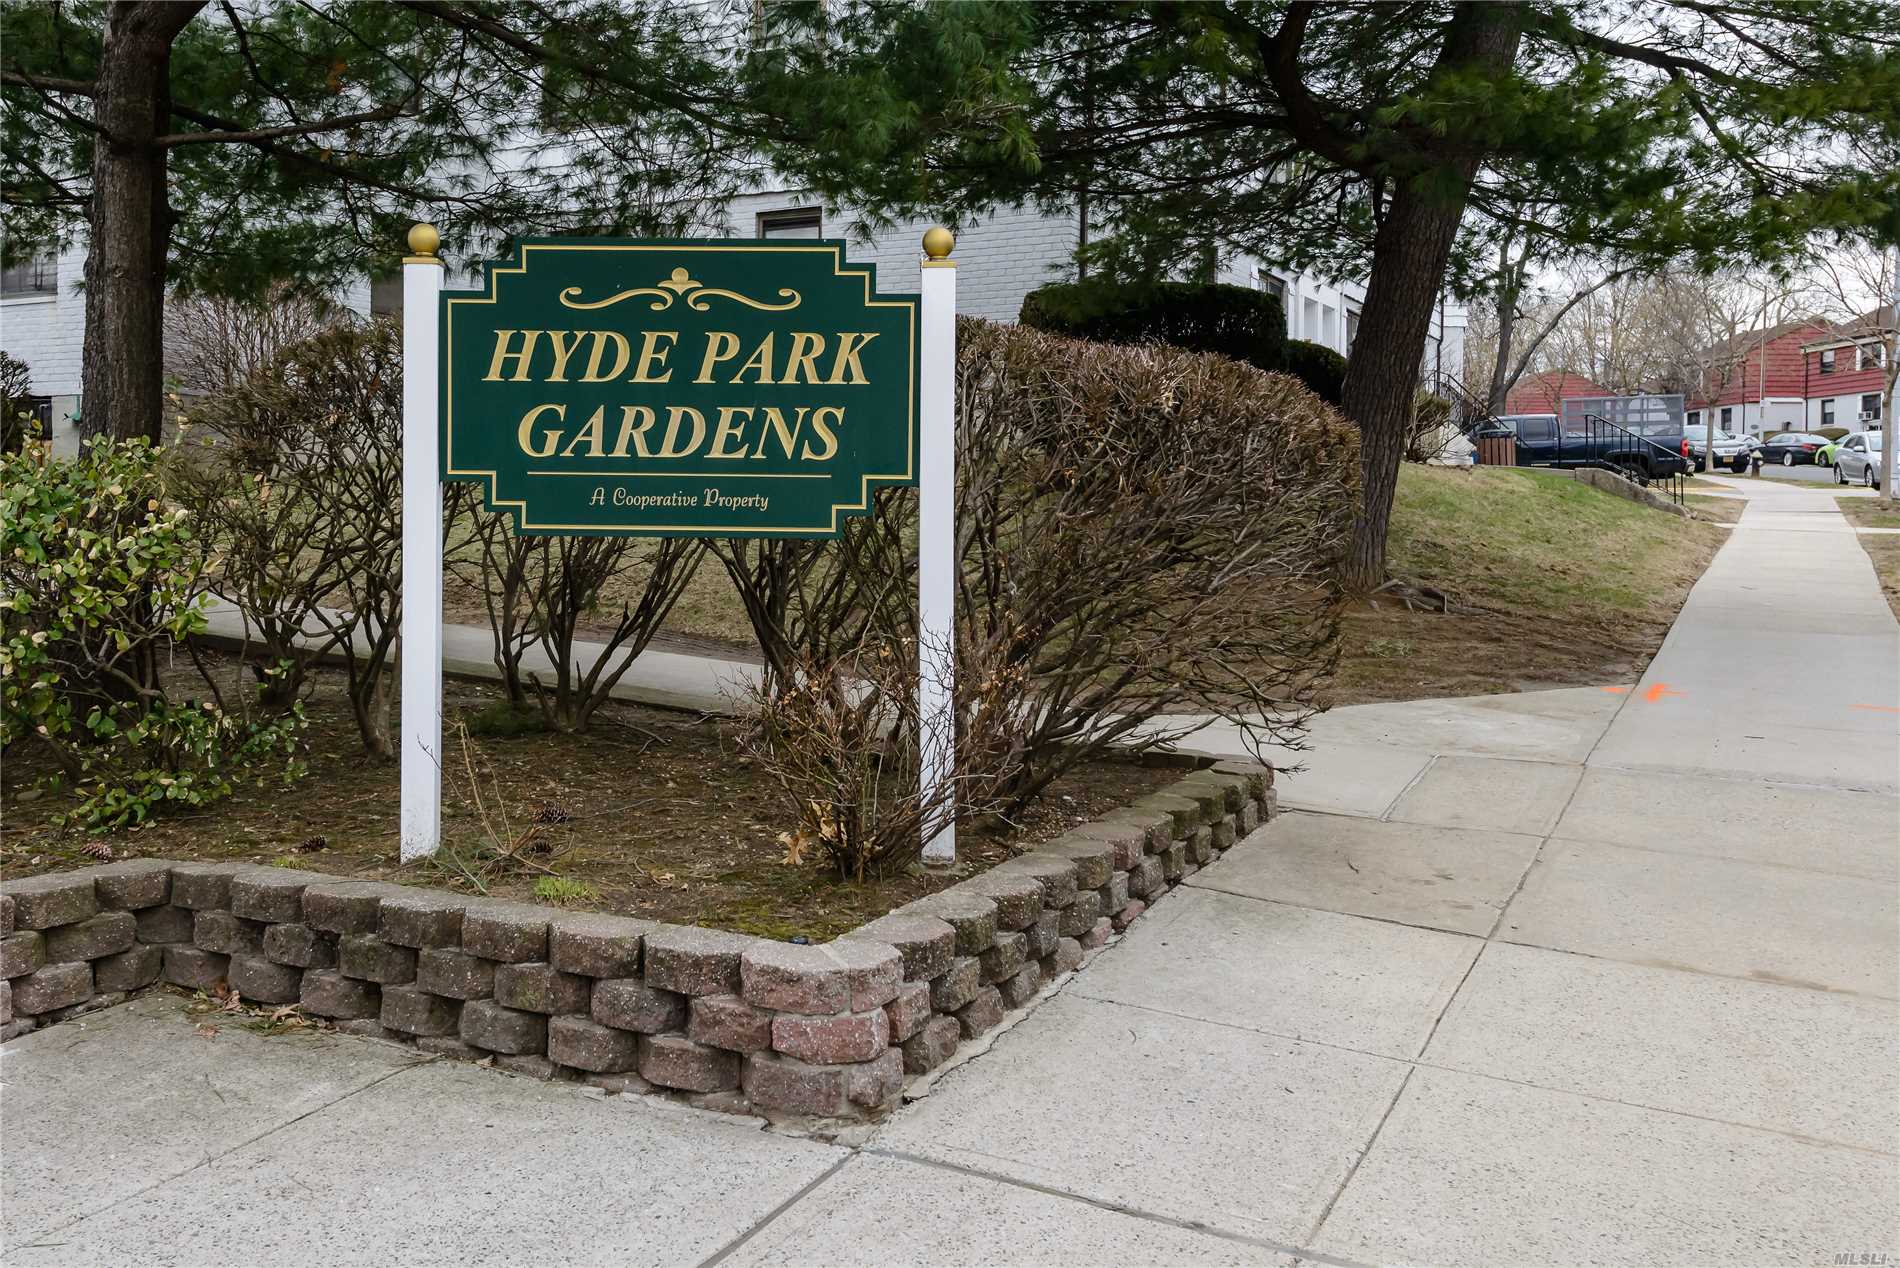 Mint 3 Bedroom, 1 Bath, First Floor Unit In Garden Apartment Complex. Totally Renovated Kitchen. Quartz Counters. Hardwood Floors Throughout. Washer/Dryer In Unit. Outdoor Patio And Barbecue Area. A Must See! Maintenance Includes: Electric, Heat & Real Estate Taxes. No Flip Tax!